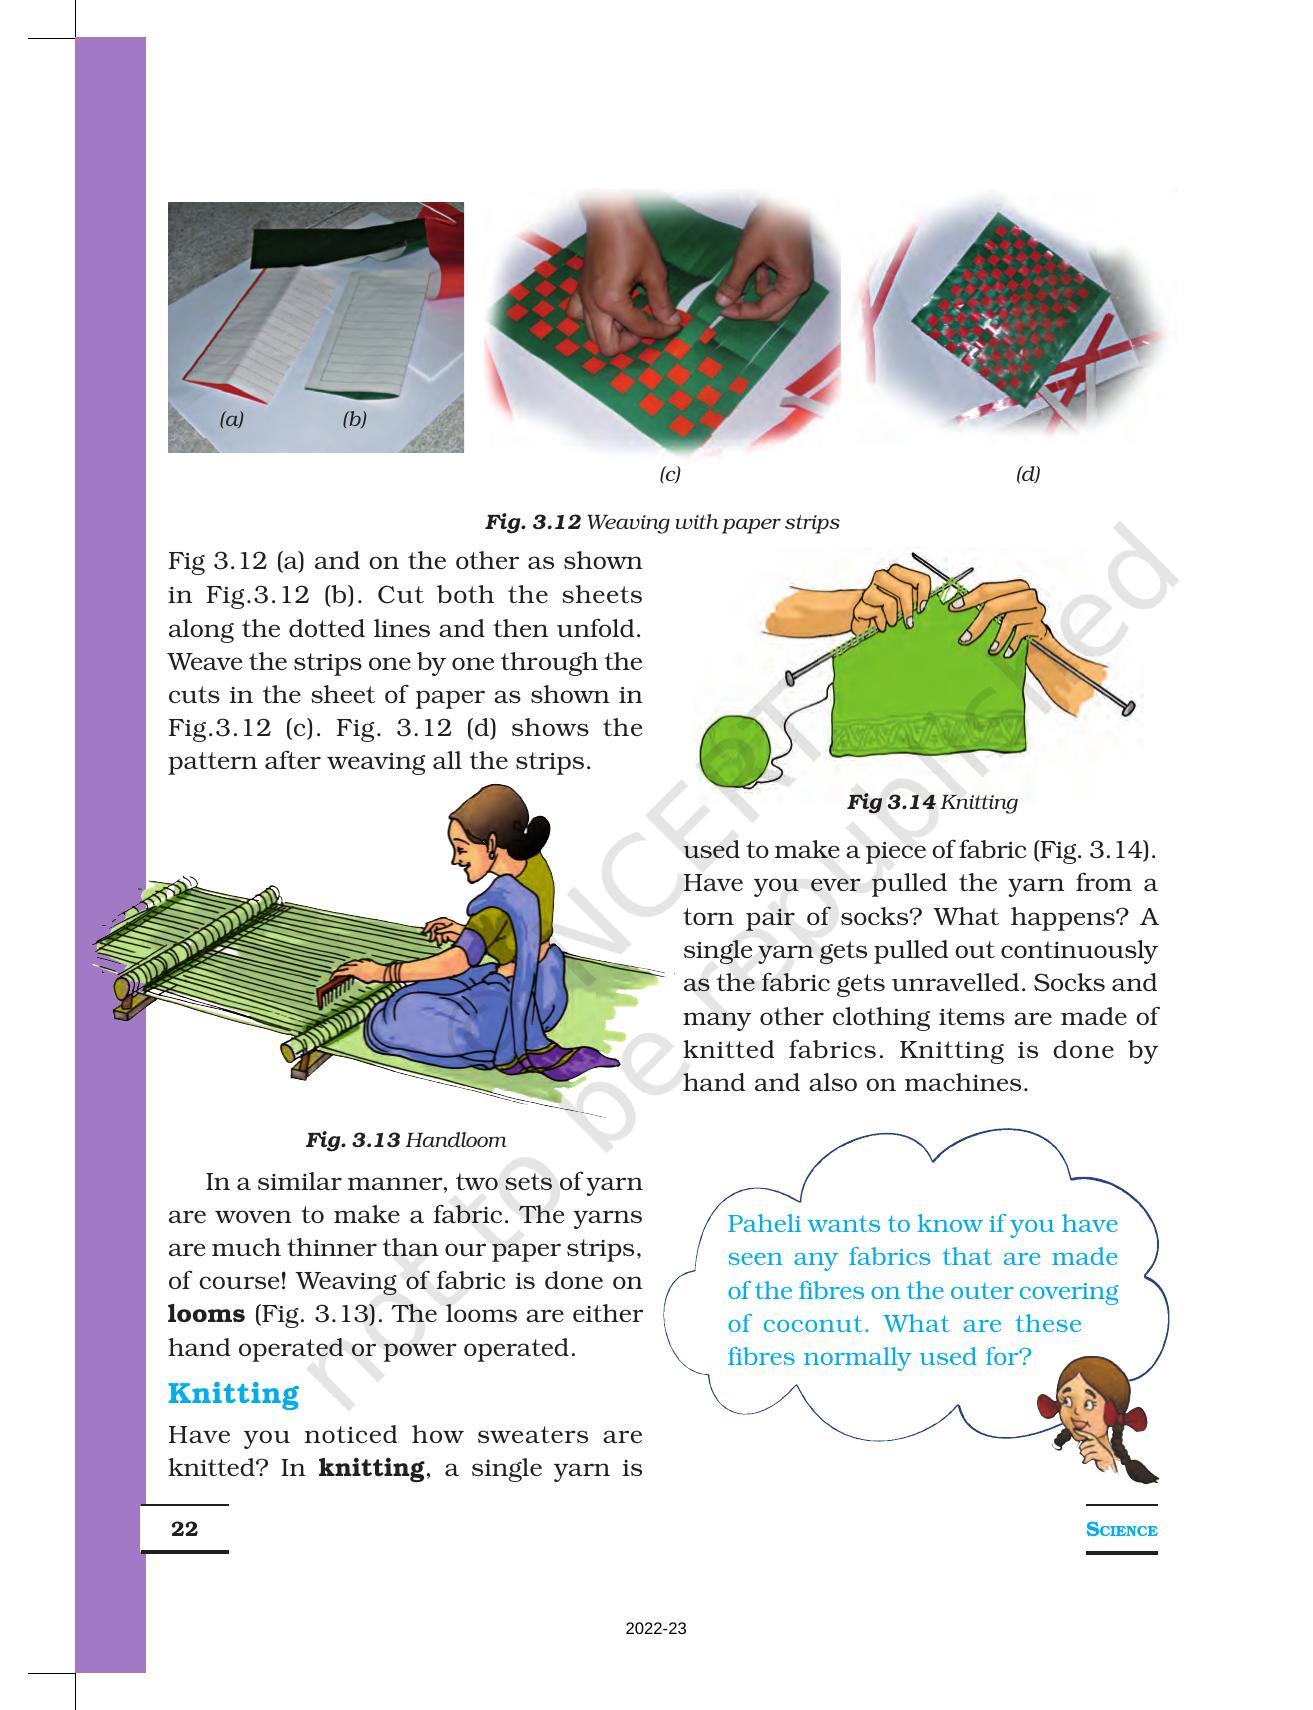 NCERT Book for Class 6 Science: Chapter 3-Fibre to Fabric - Page 5